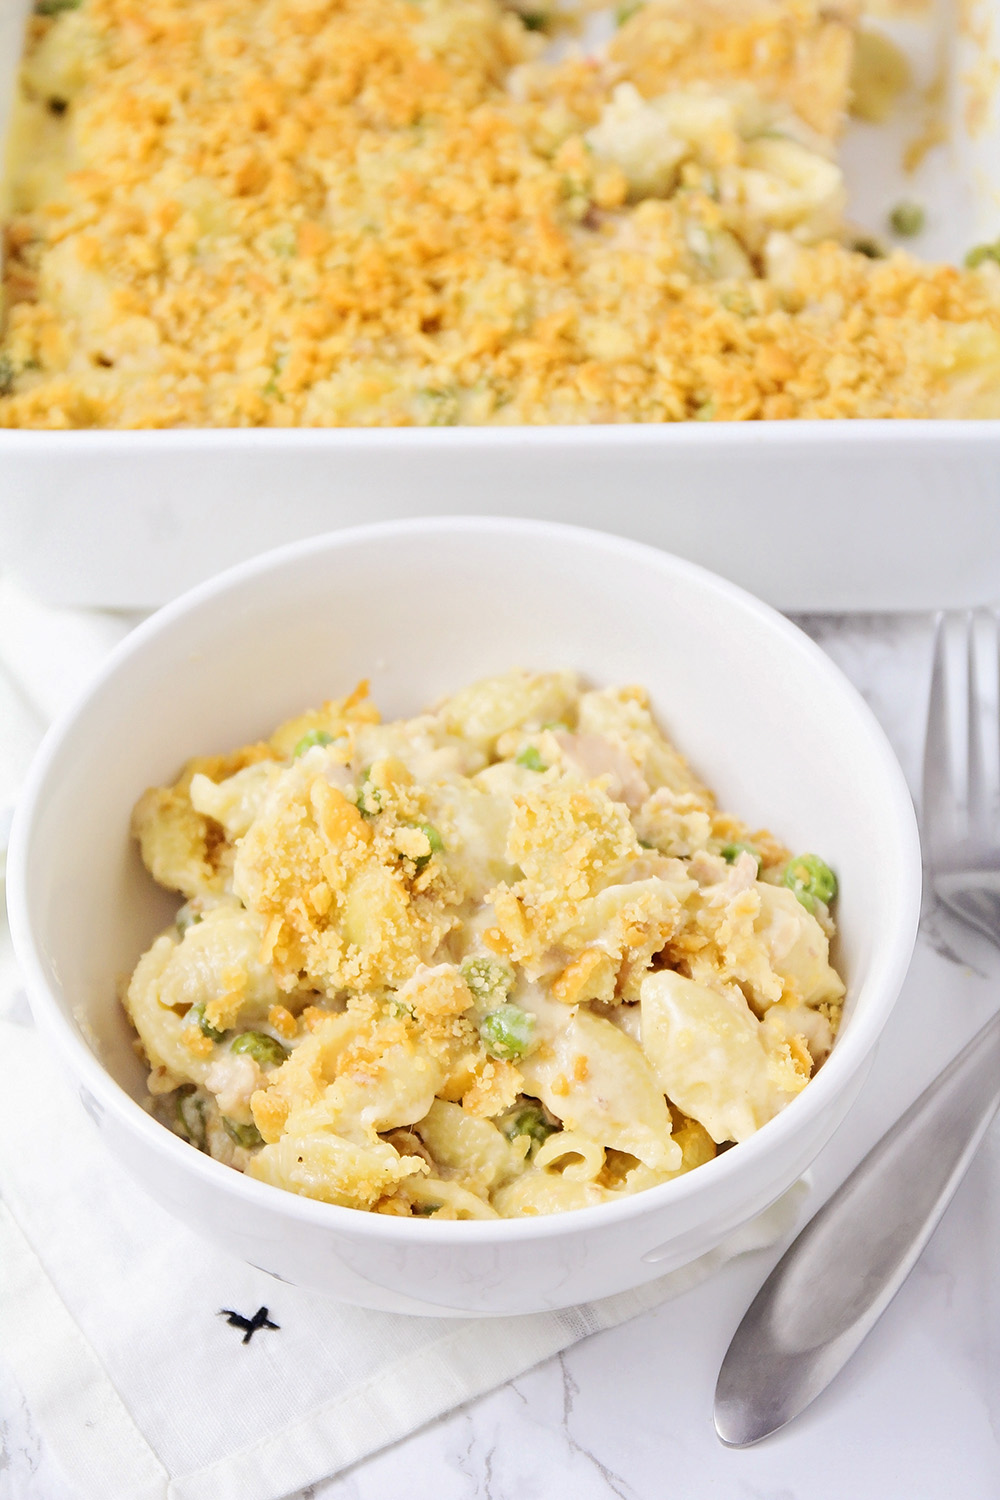 This creamy comfort food tuna casserole is made from scratch, and totally delicious!